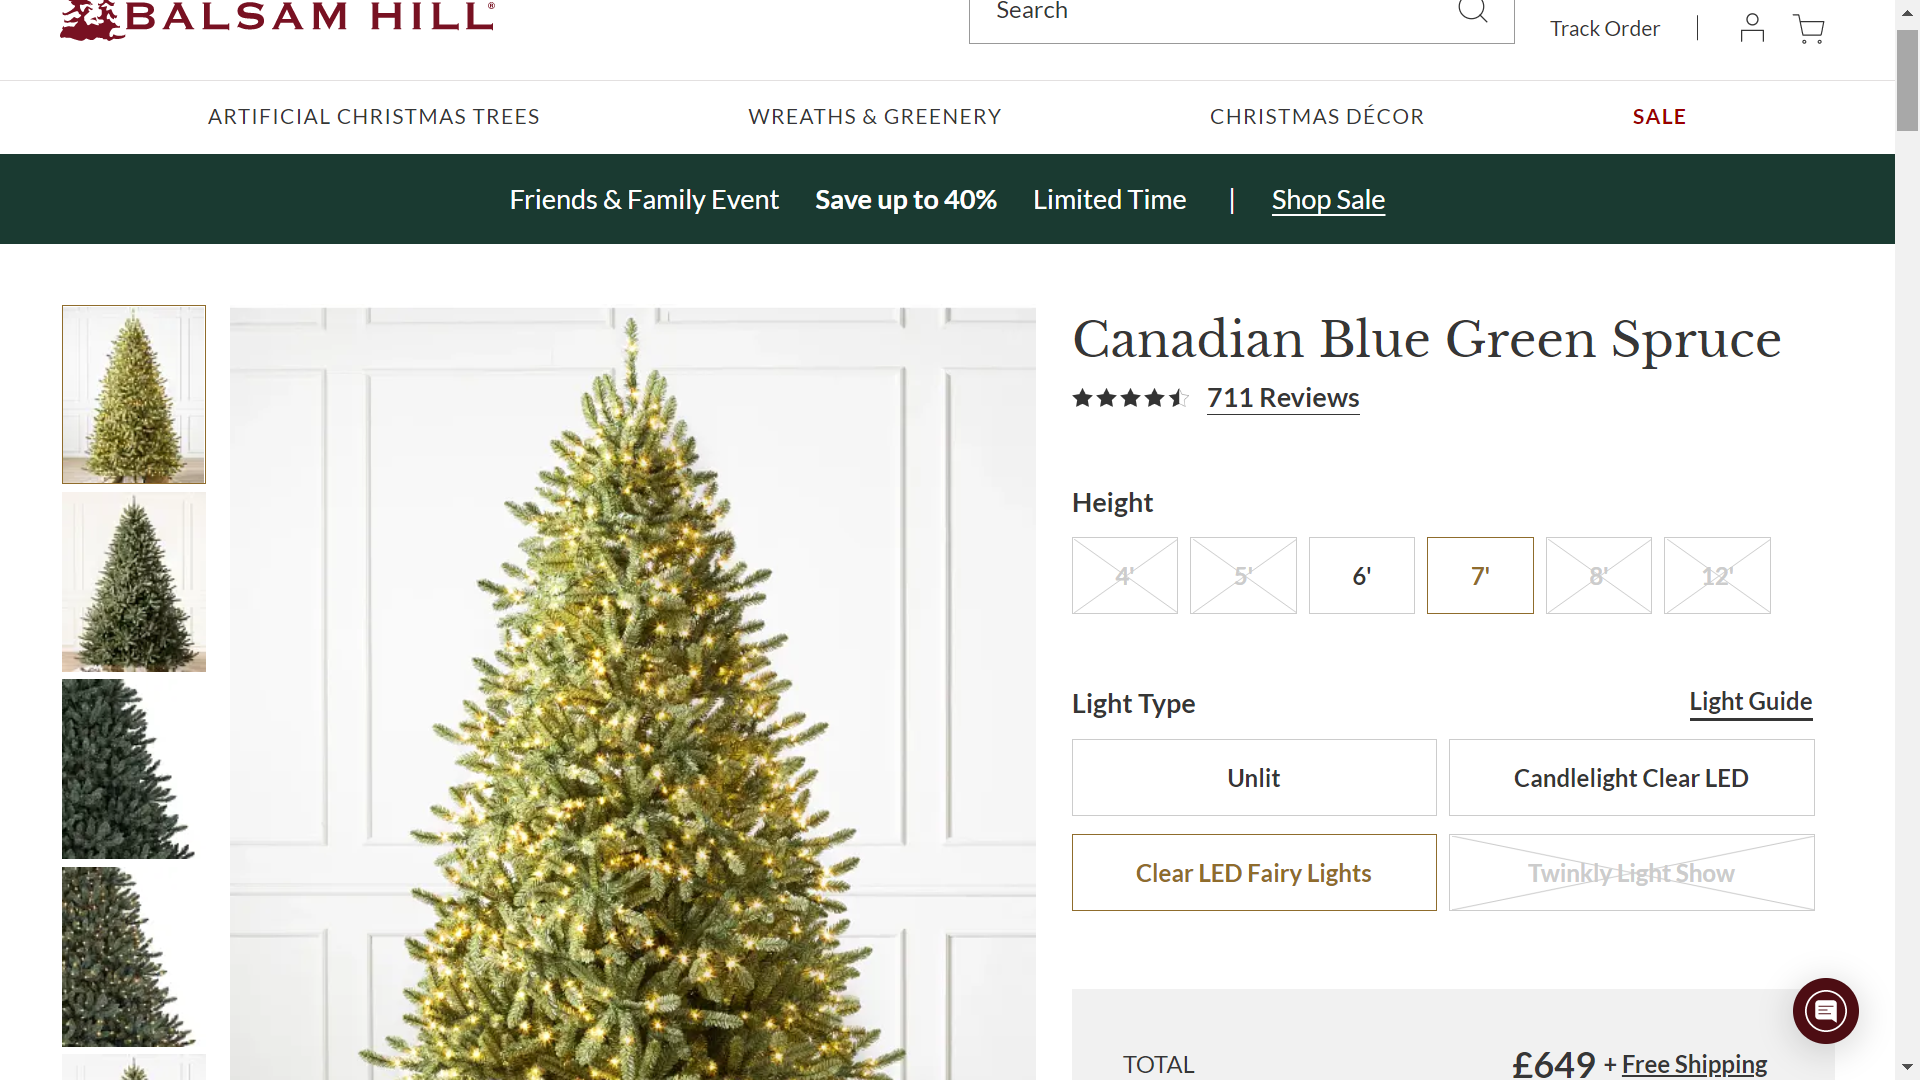 BH (The worlds leading Christmas Tree Brand) Canadian Blue Green Spruce 7' Tree with LED Clear Fairy - Image 2 of 2